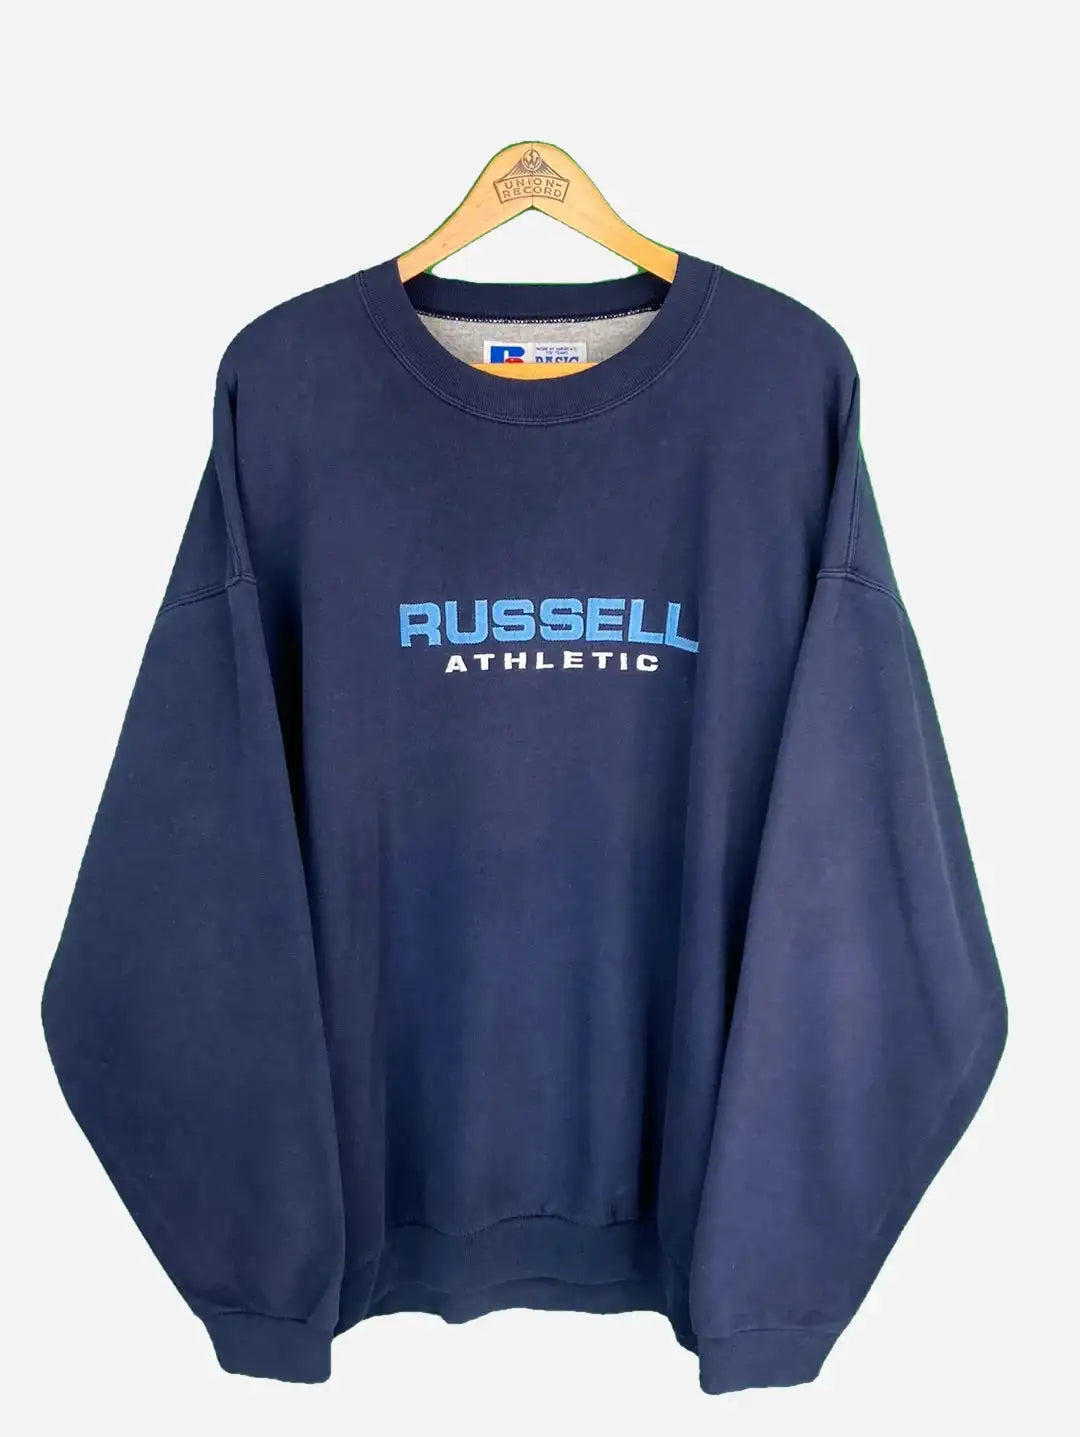 Russell Athletic Sweater (XXL)